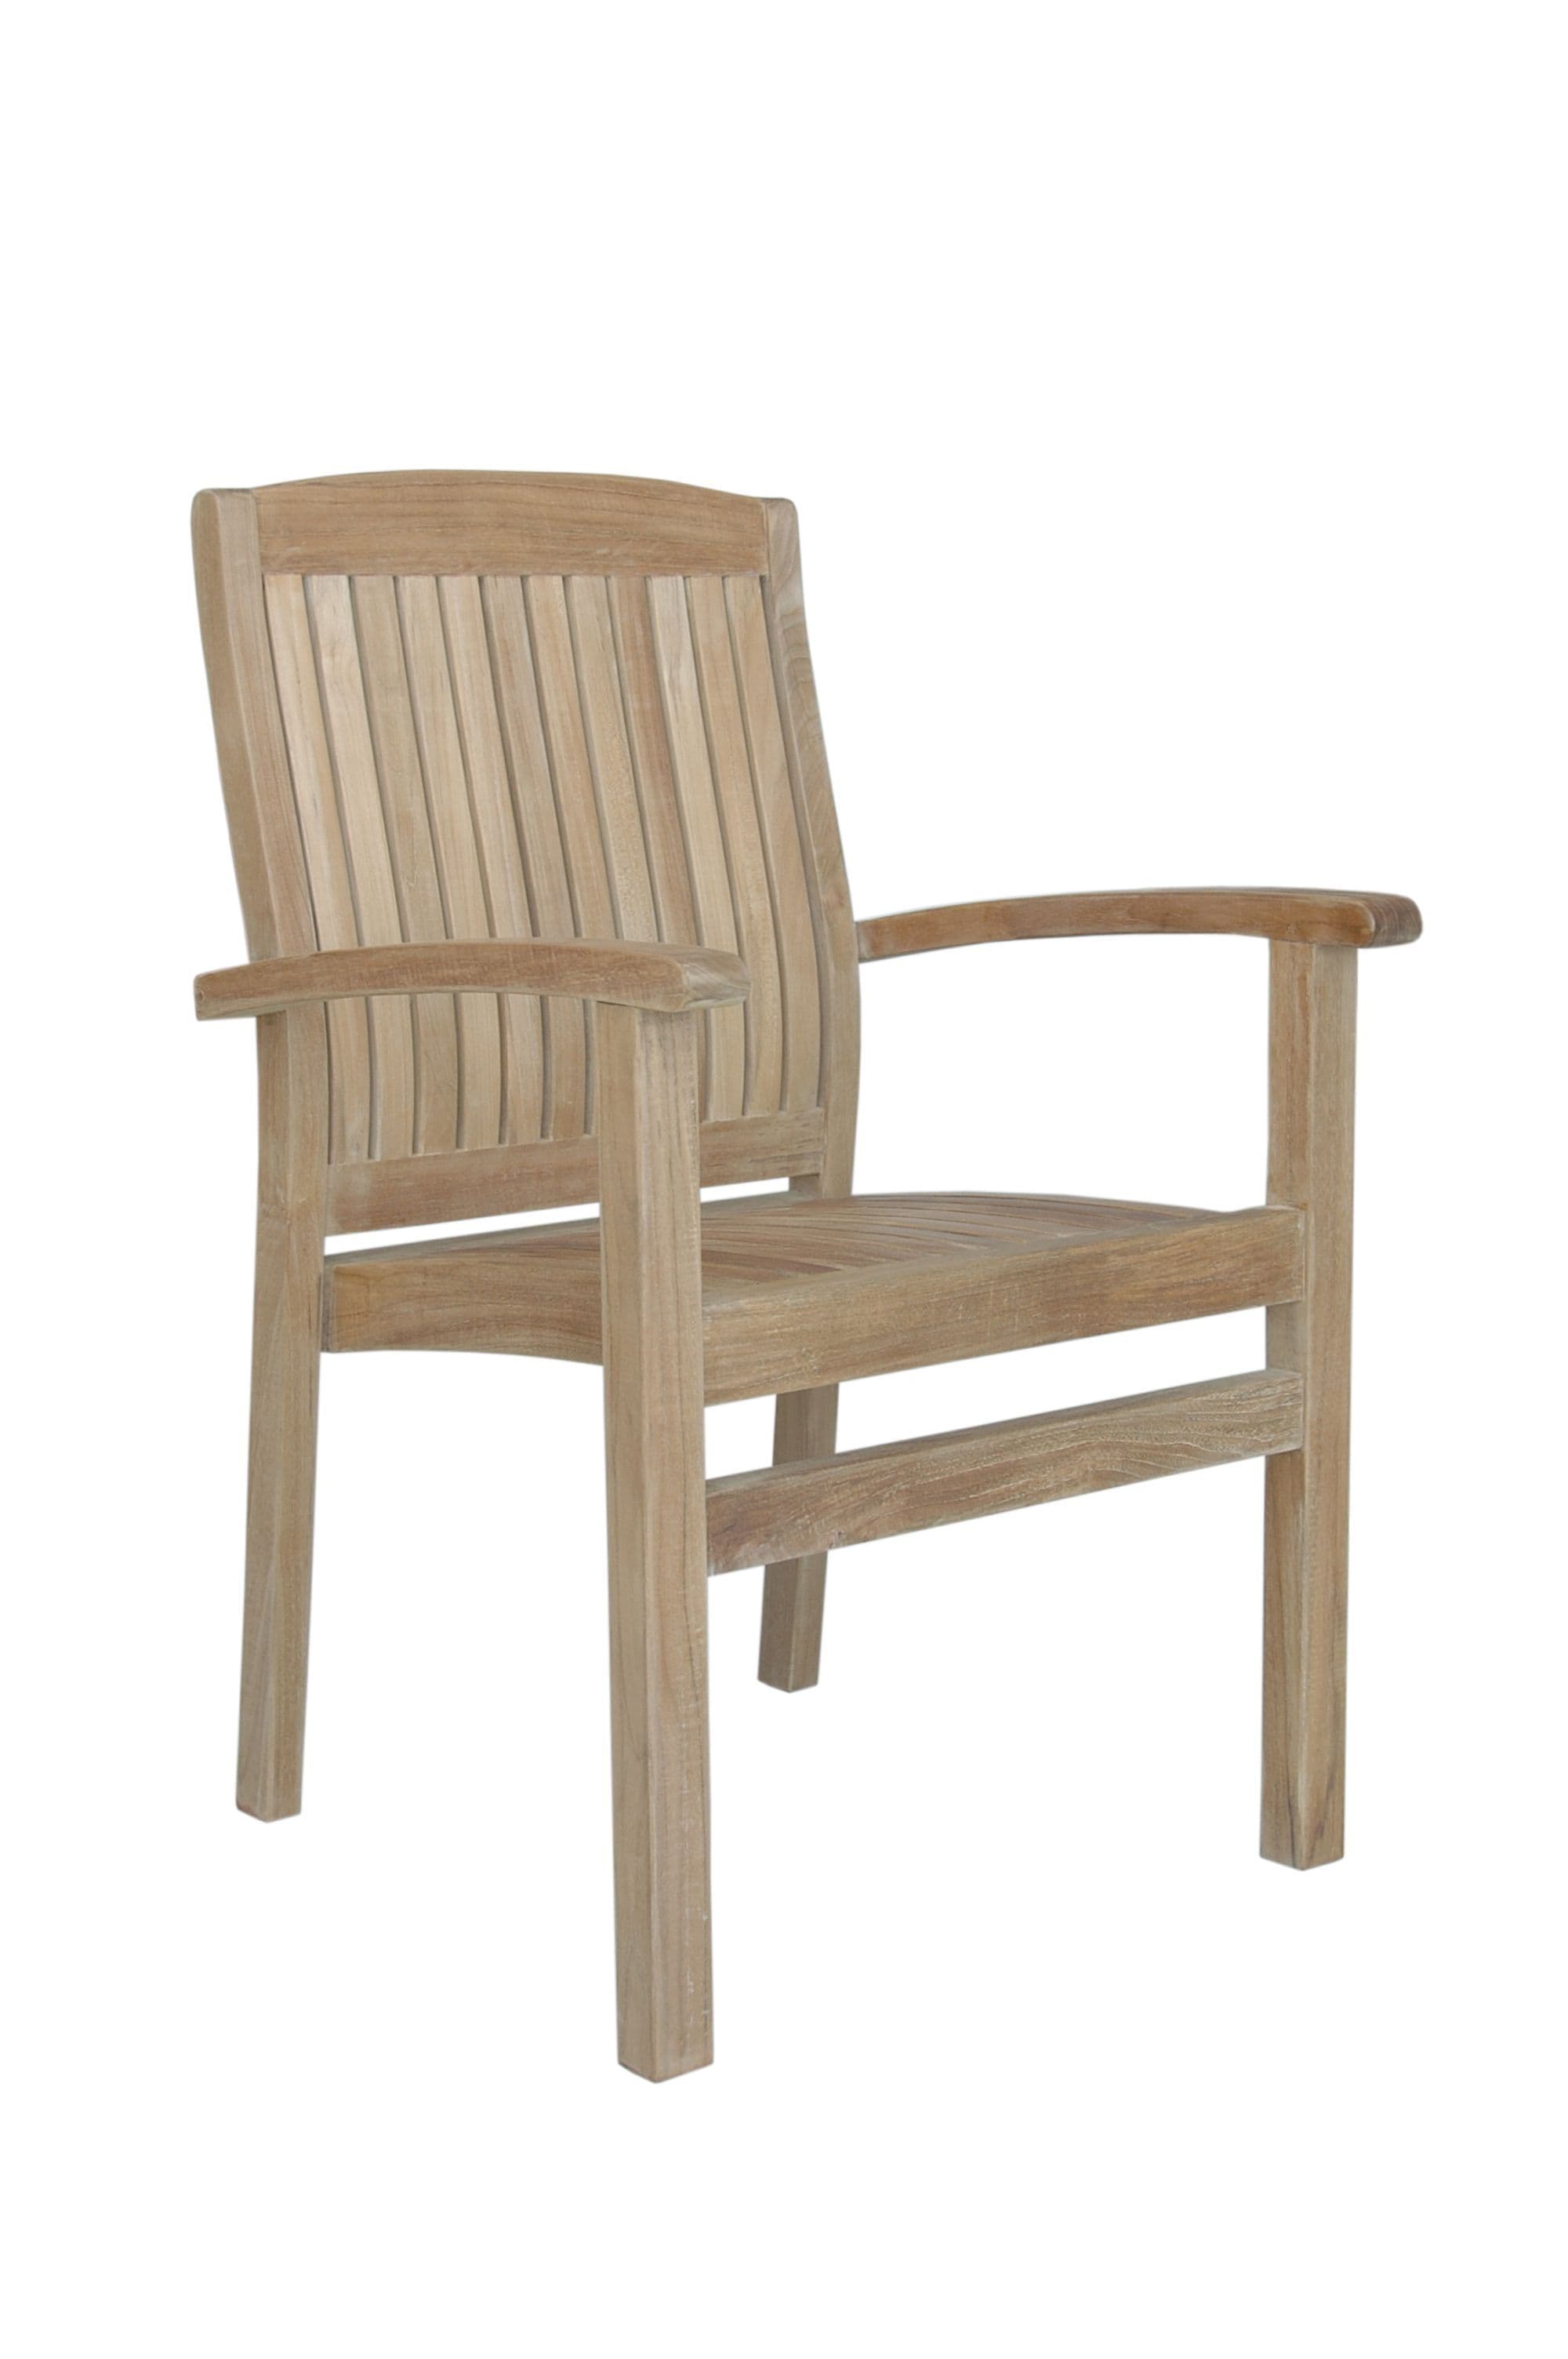 Anderson Teak Outdoor Folding Chairs Anderson Teak Sahara Stackable Dining Armchair